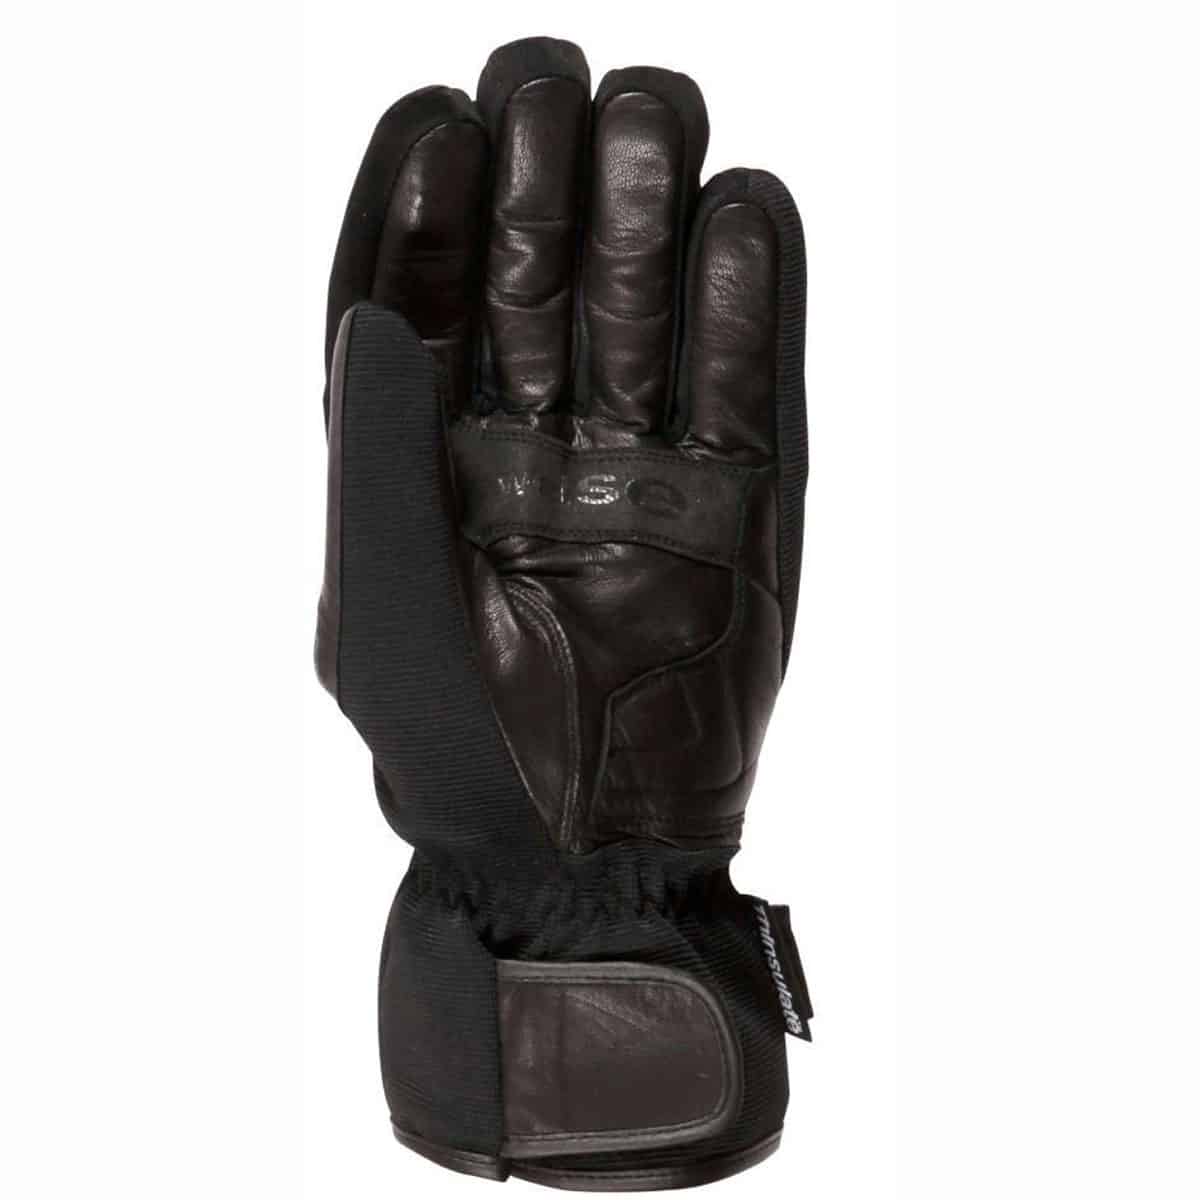 Weise Bergen motorcycle gloves for winter riding 2